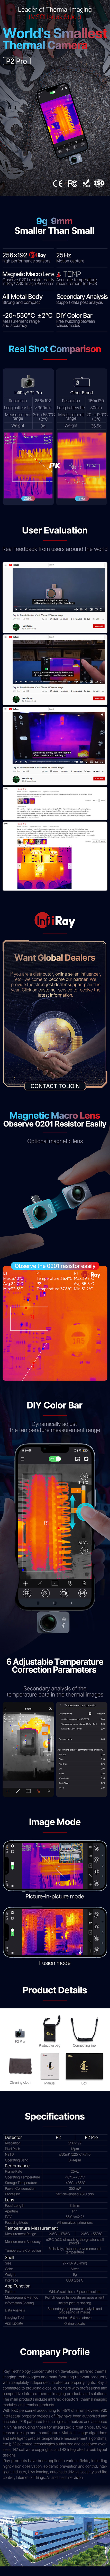 P2 Pro Thermal Camera for Smartphone